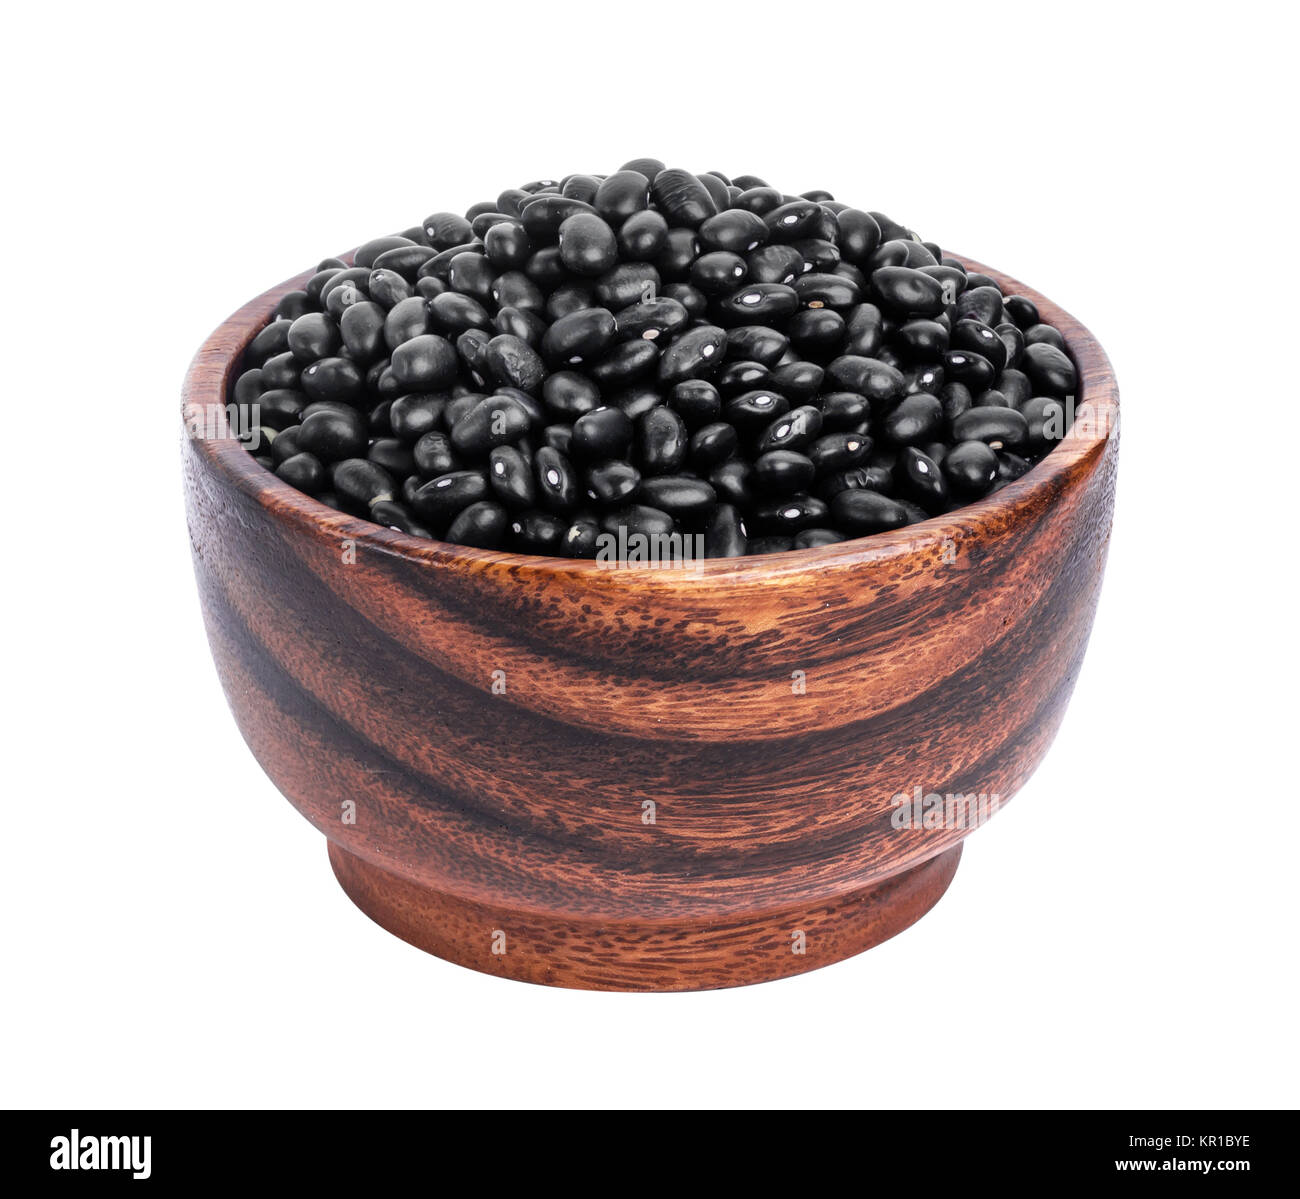 Black beans in wooden bowl isolated on white background Stock Photo